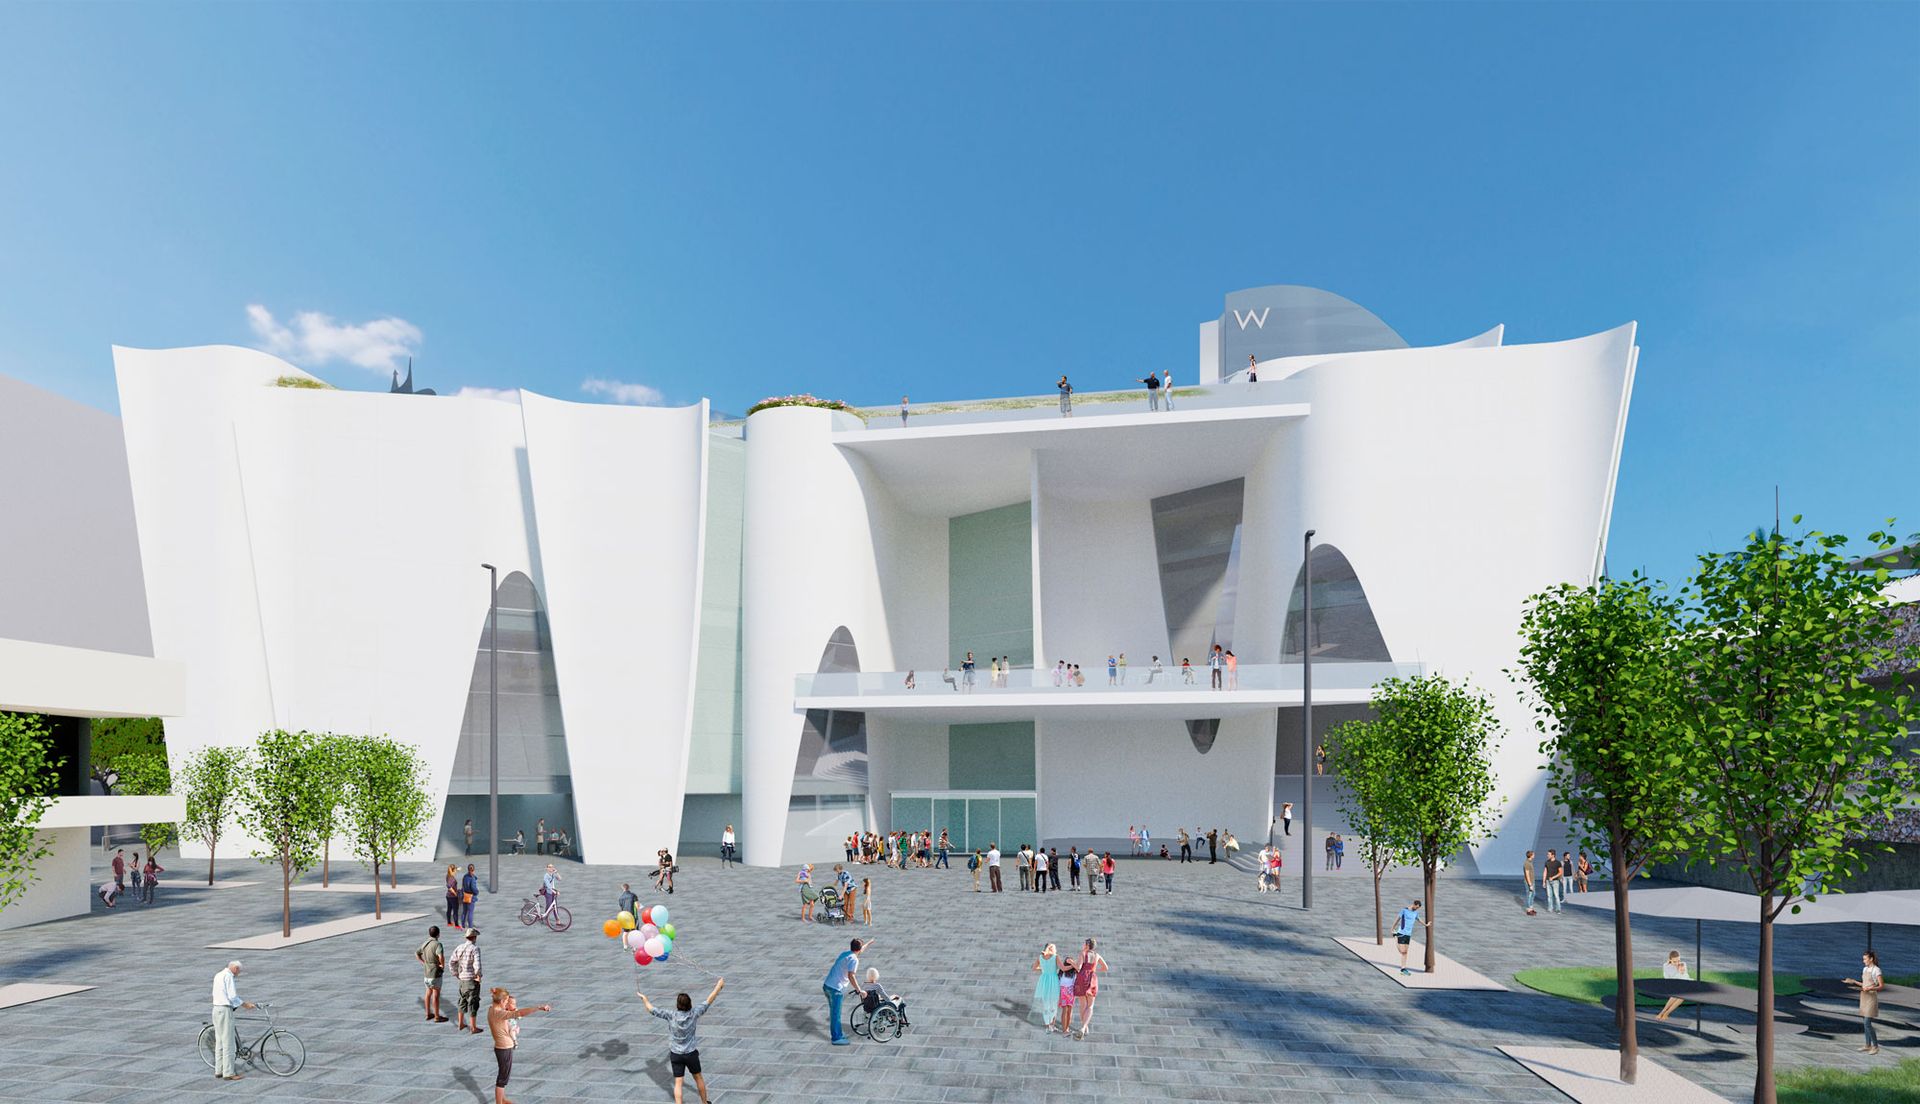 A rendering of the proposed Hermitage Barcelona, designed by the architect Toyo Ito © Toyo Ito & Associates, Architects